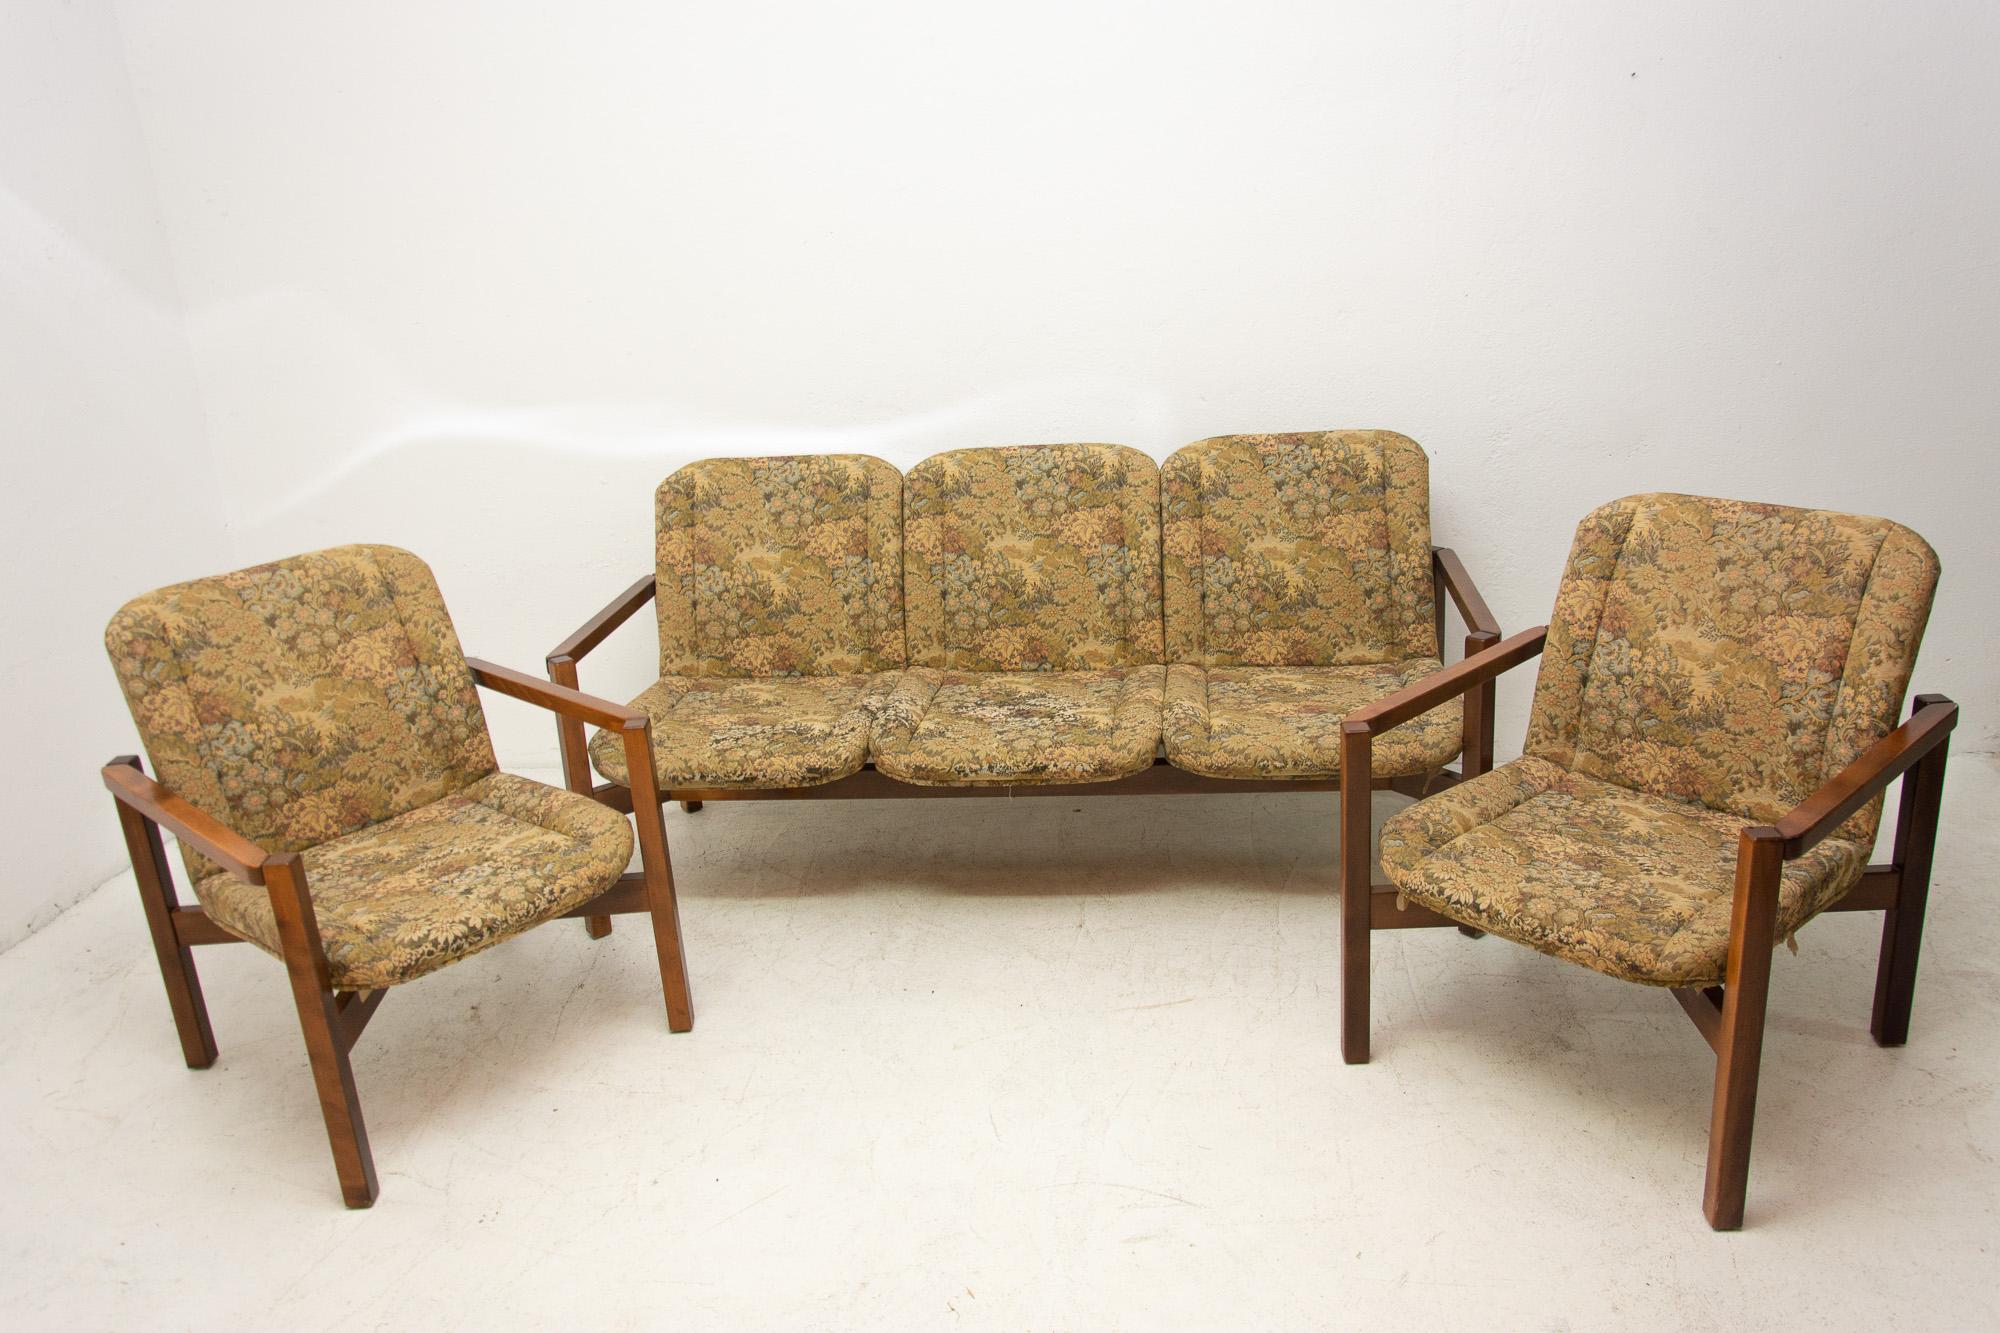 This lounge seating group was made in the 1980s in the former Czechoslovakia. Consists of one sofa and two armchairs. The set is upholstered in fabric. The structure is probably made of pine wood. The furniture is in good vintage condition, shows